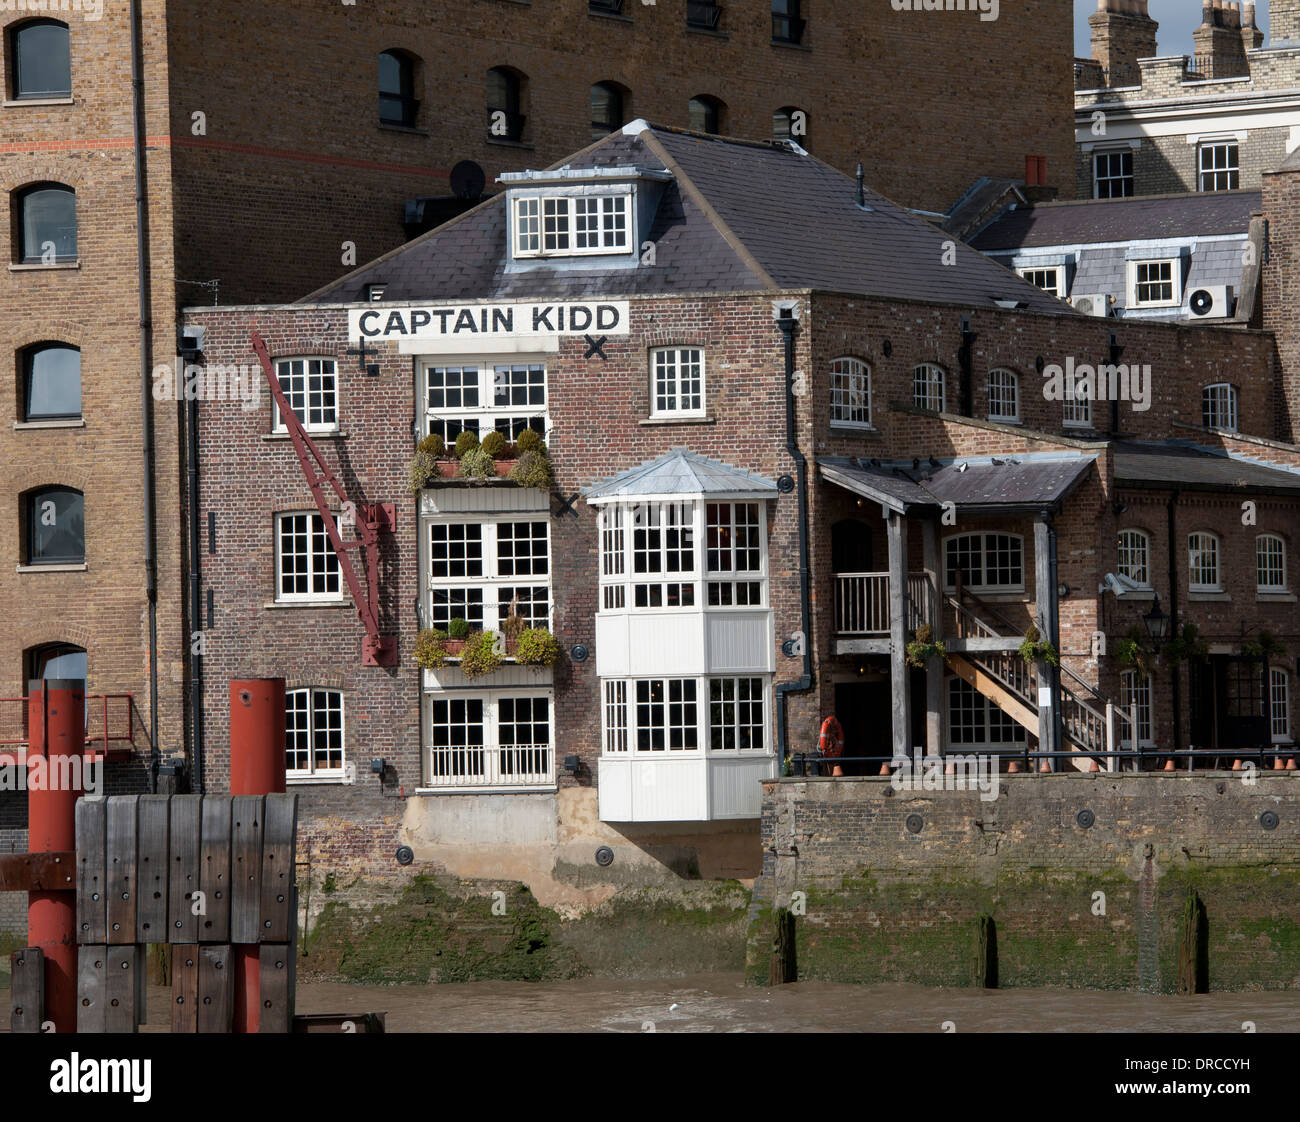 The Captain Kidd public house,Wapping High Street, London, viewed from the River Thames, UK. Stock Photo